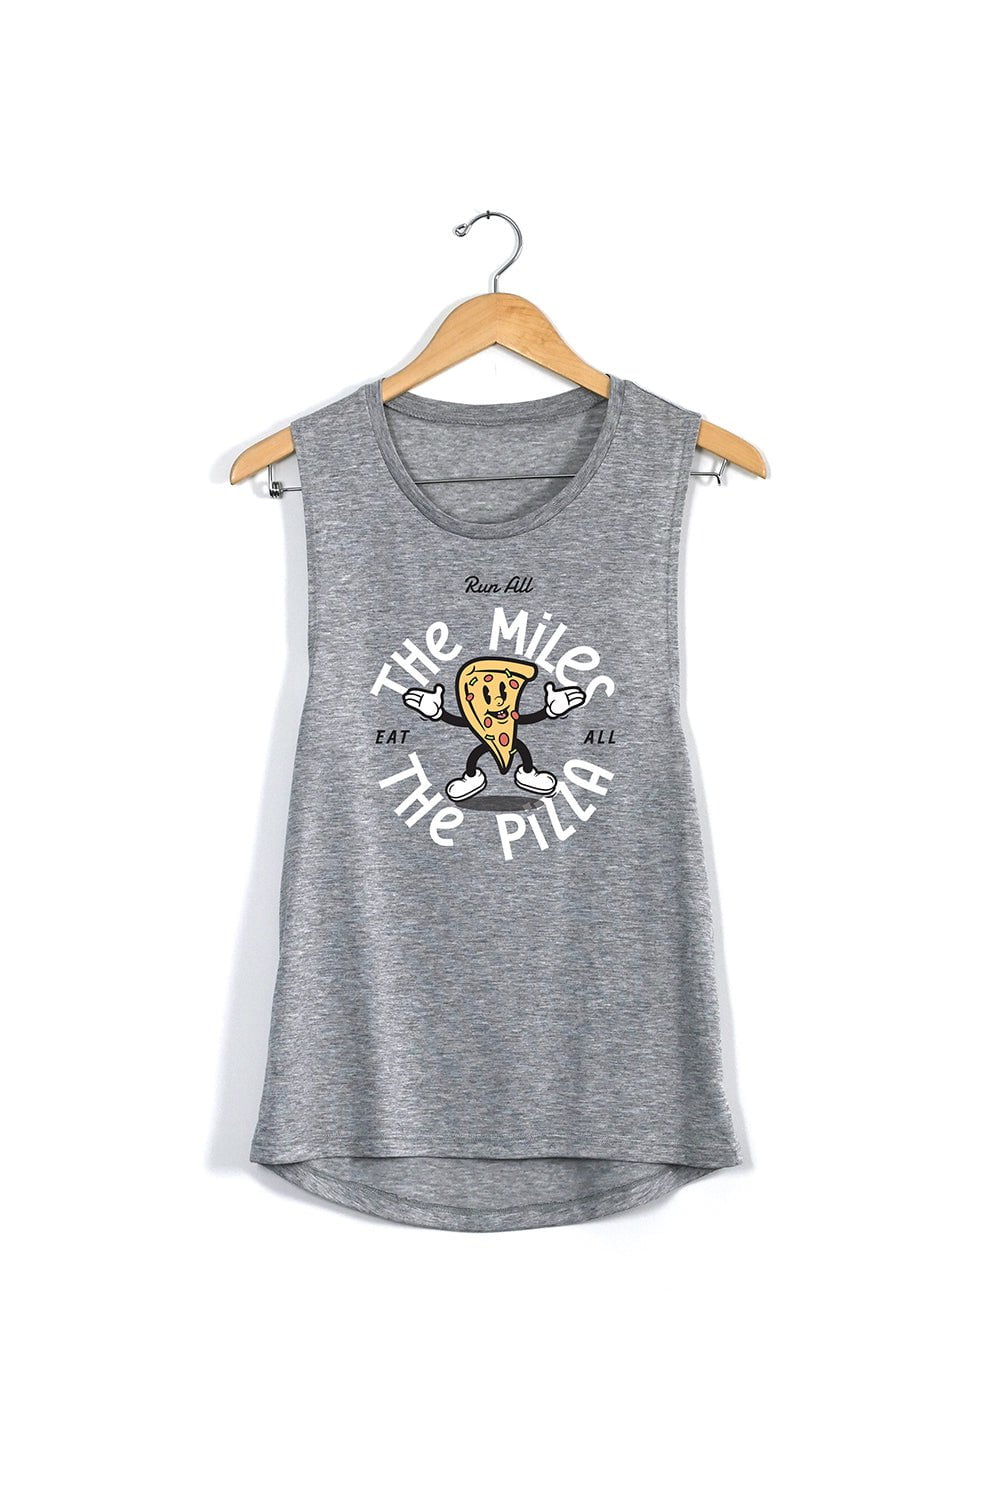 Sarah Marie Design Studio Small / Grey Run All The Miles, Eat All The Pizza Muscle Tank